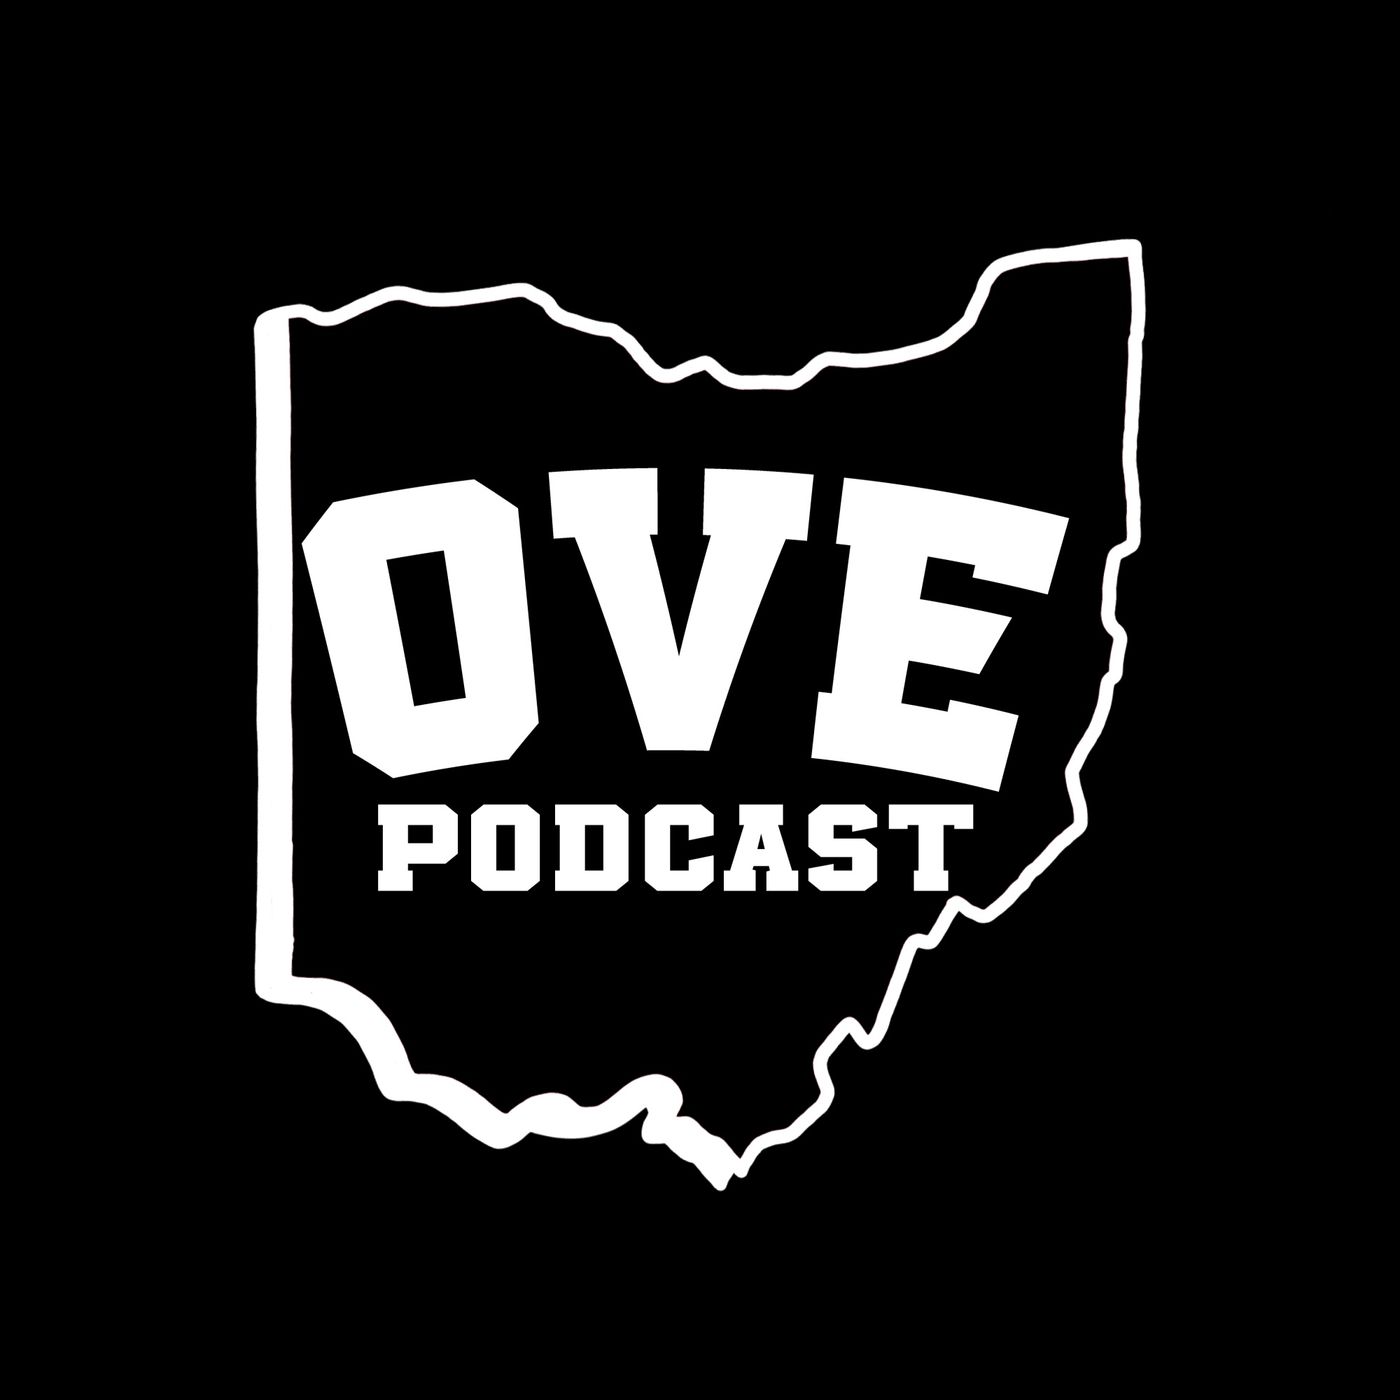 The OVE Podcast